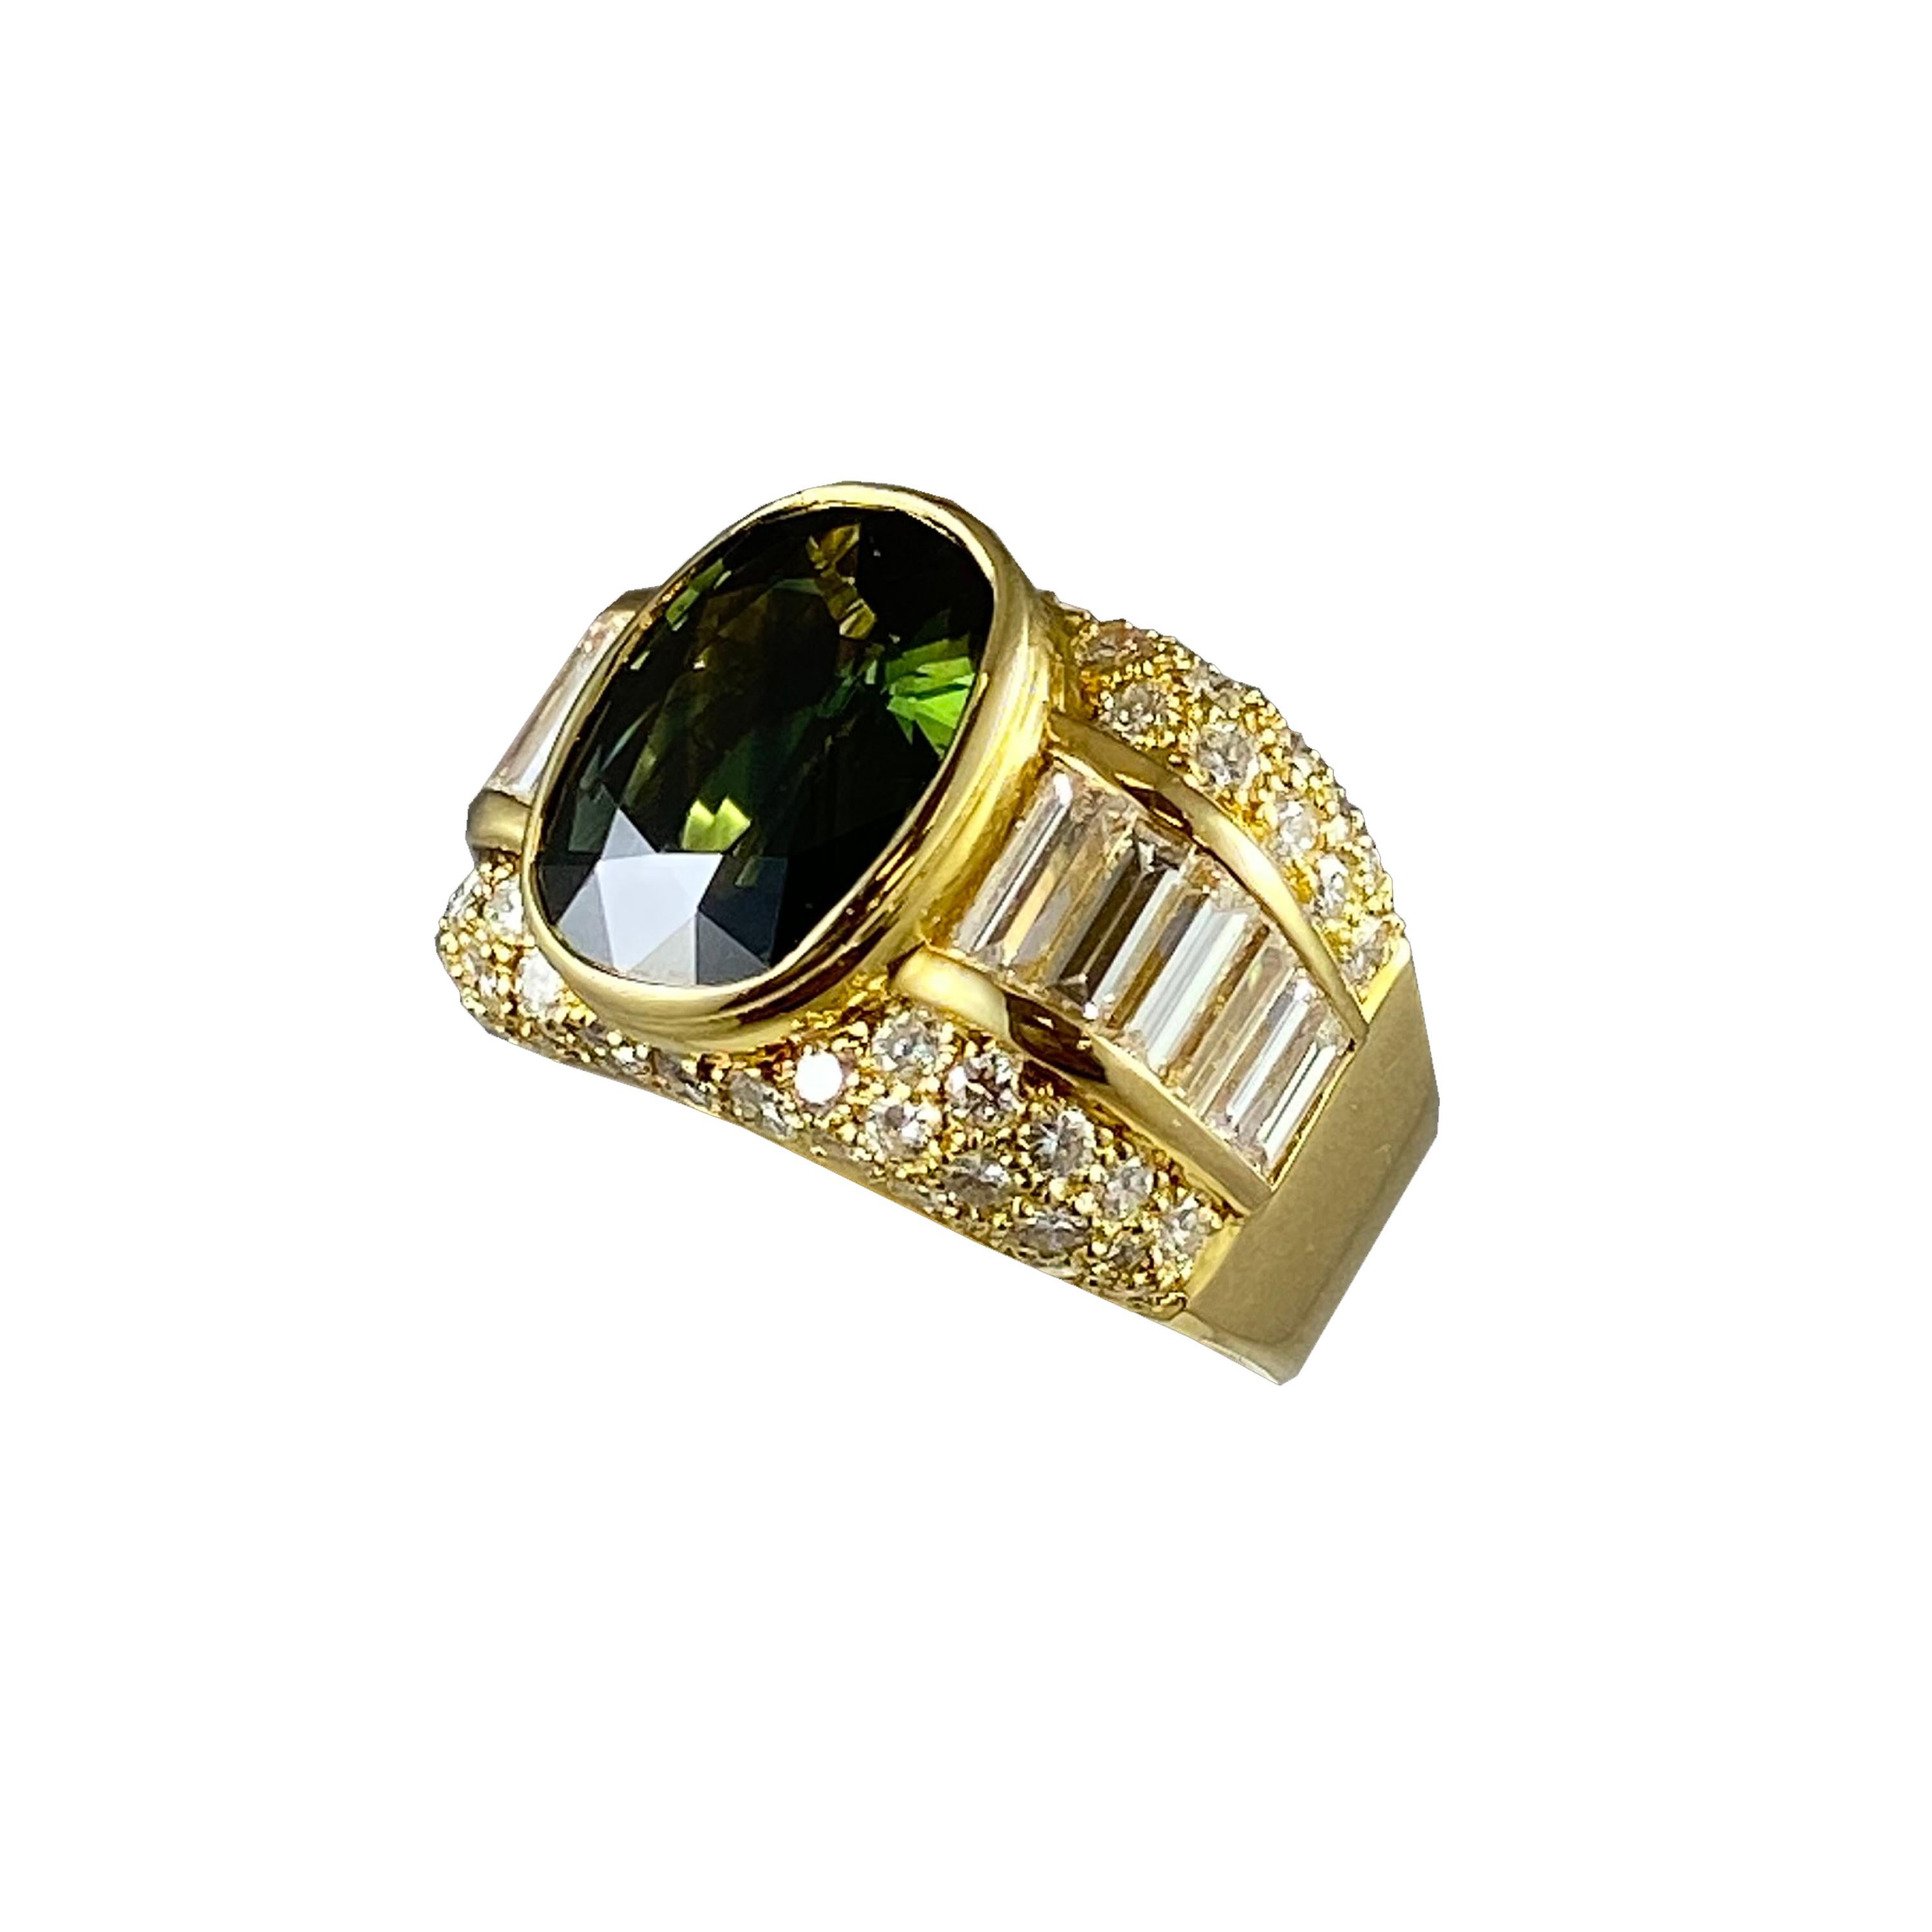 Hammerman Jewels 18 karat yellow gold cocktail ring with green sapphire and diamonds. 1.94 carats of diamonds, 6.36 carats of green sapphire. Size 5 3/4.